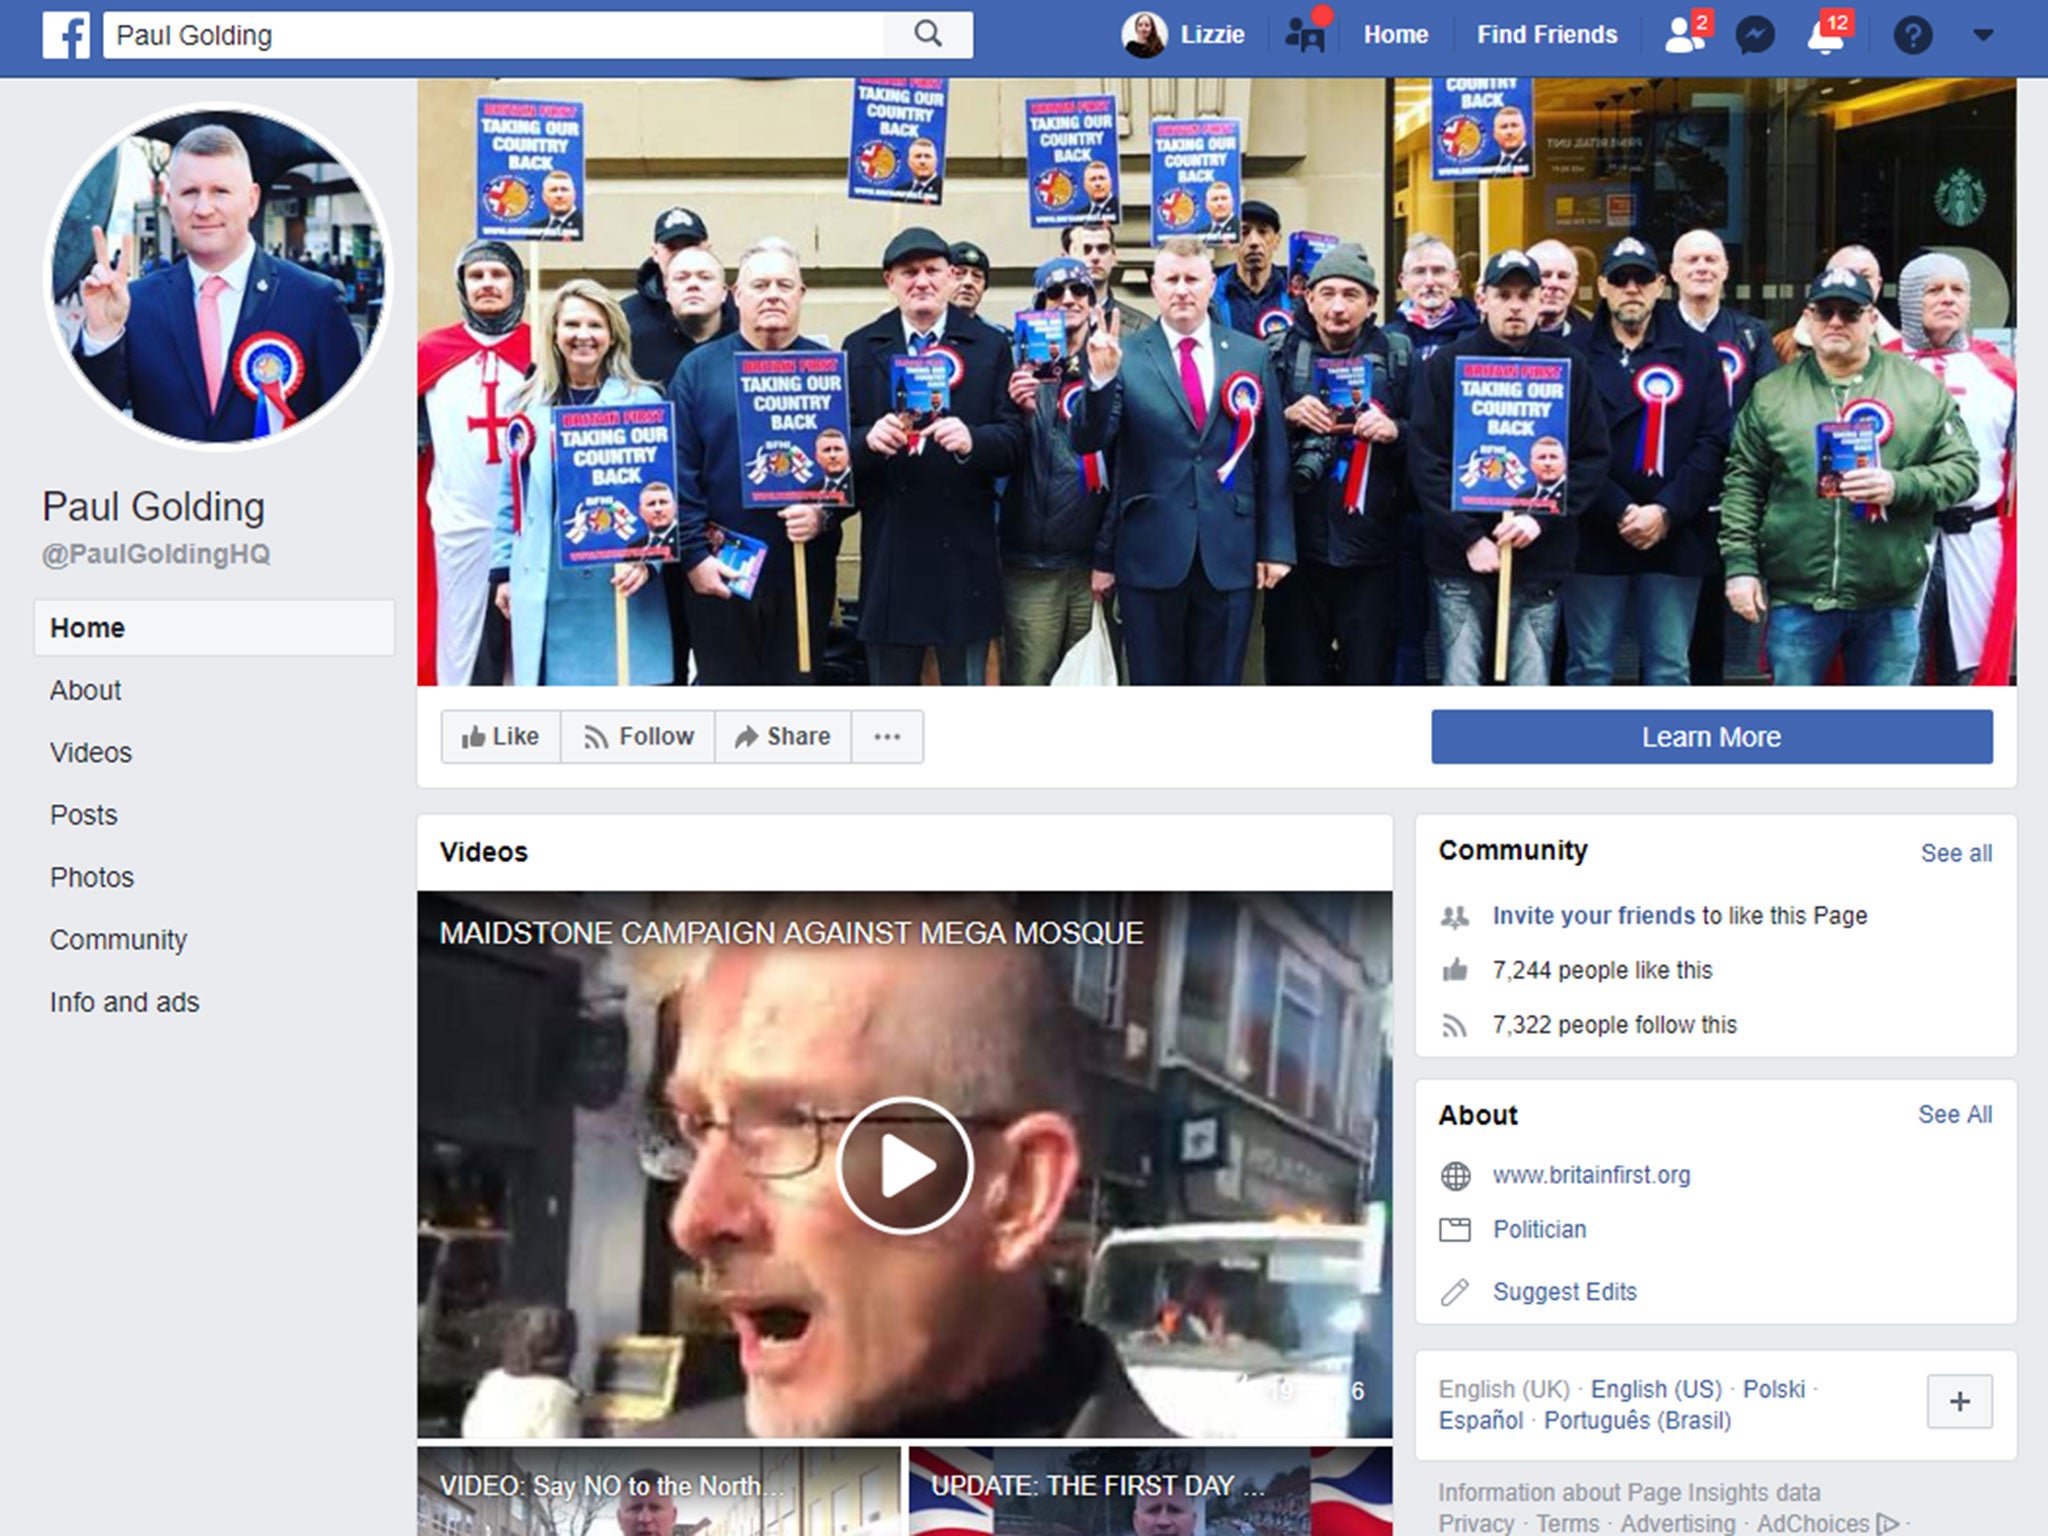 Both of Paul Golding's Facebook pages listed him as the leader of Britain First and linked to the group's official website